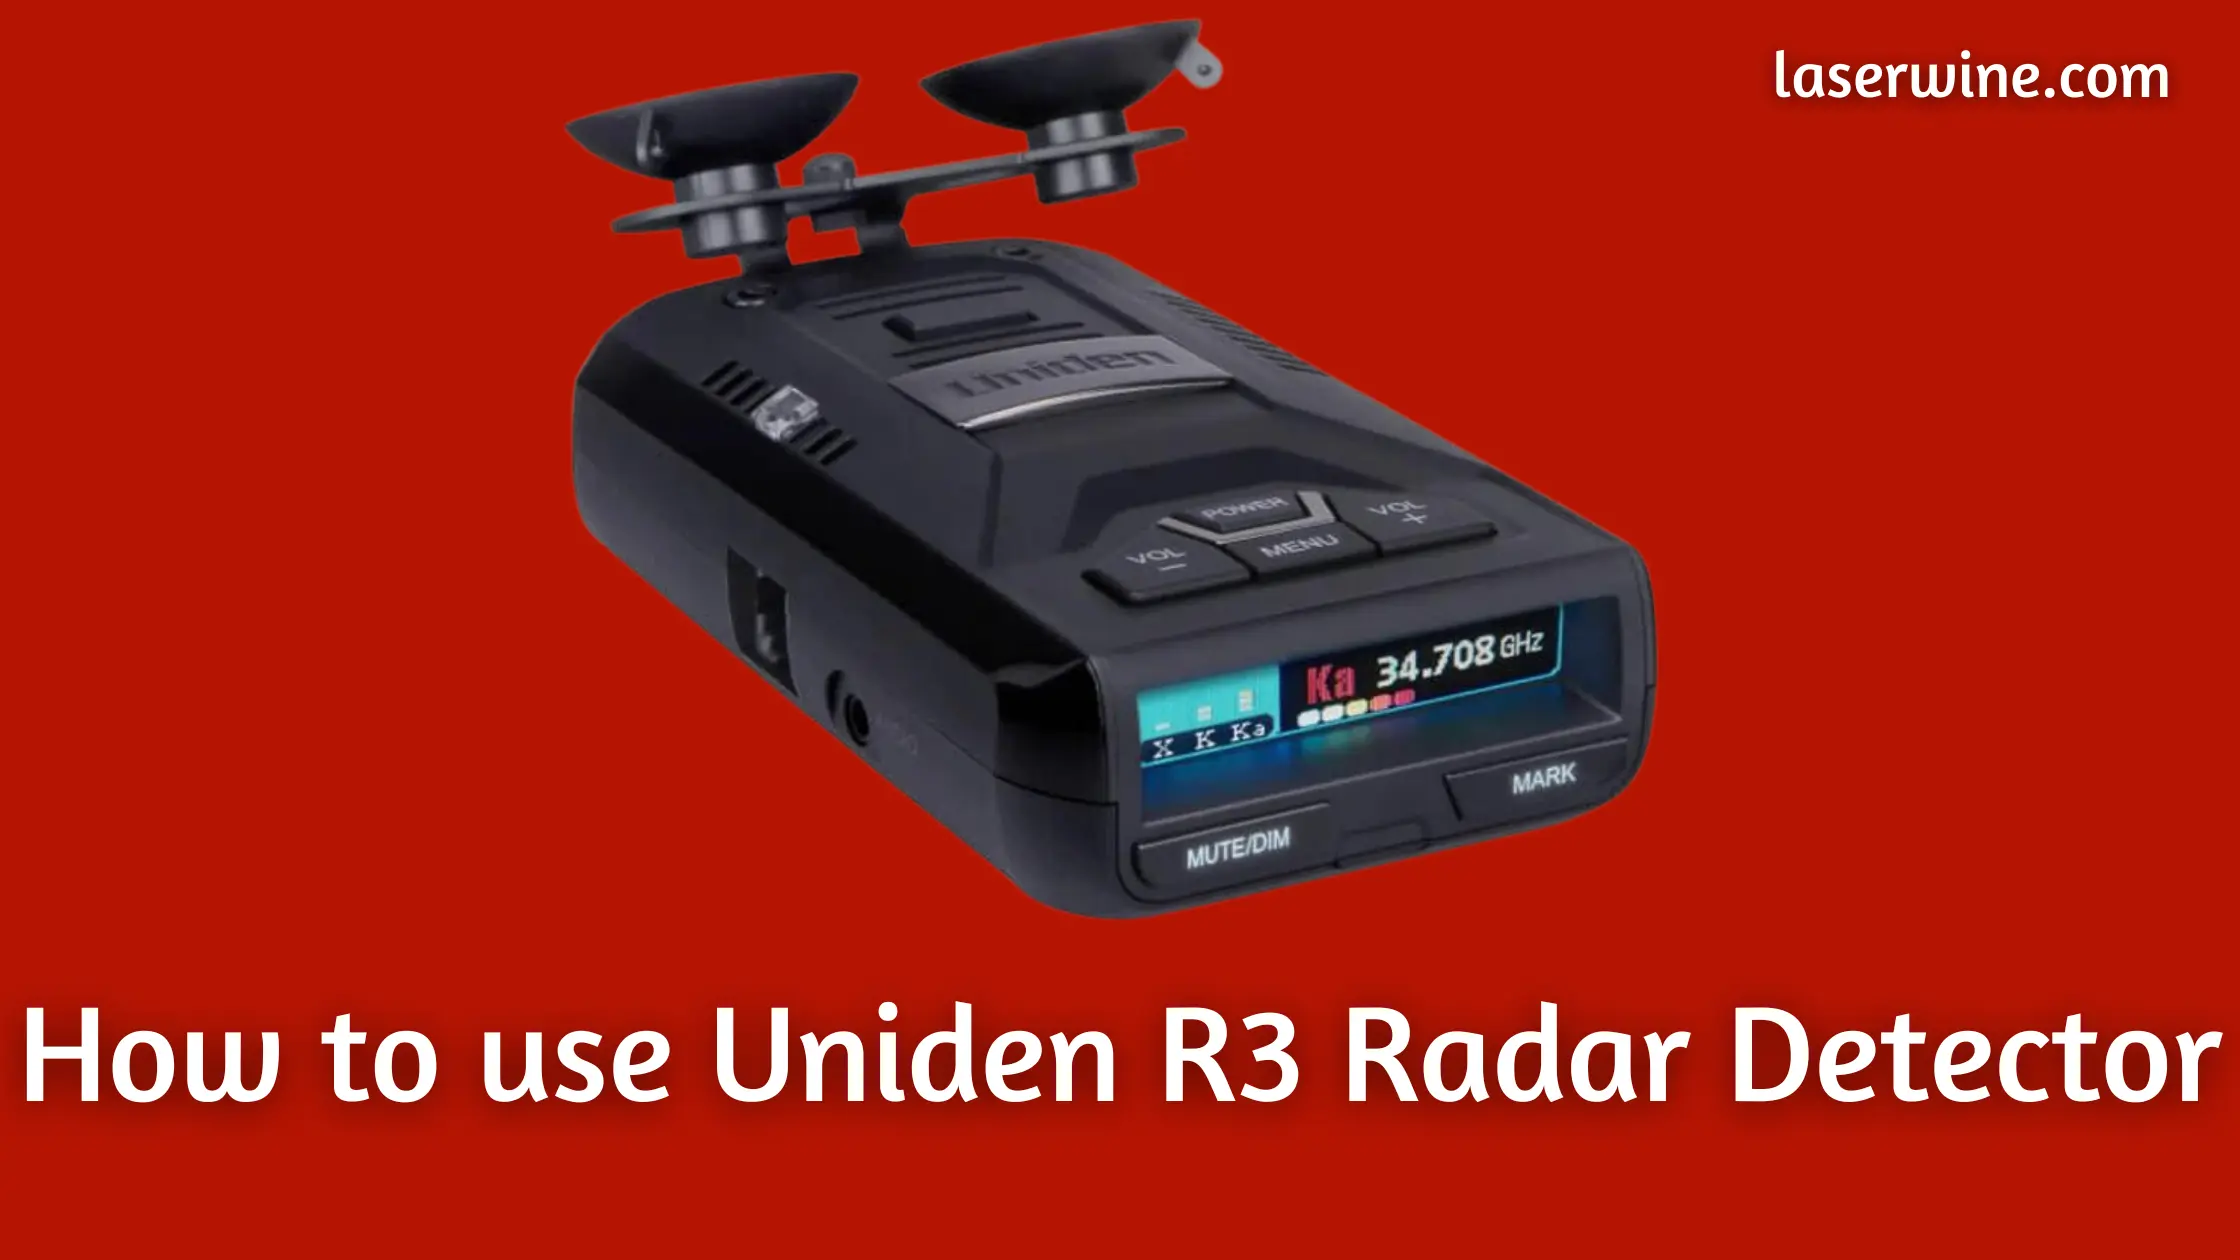 How to Use Uniden R3 Radar Detector